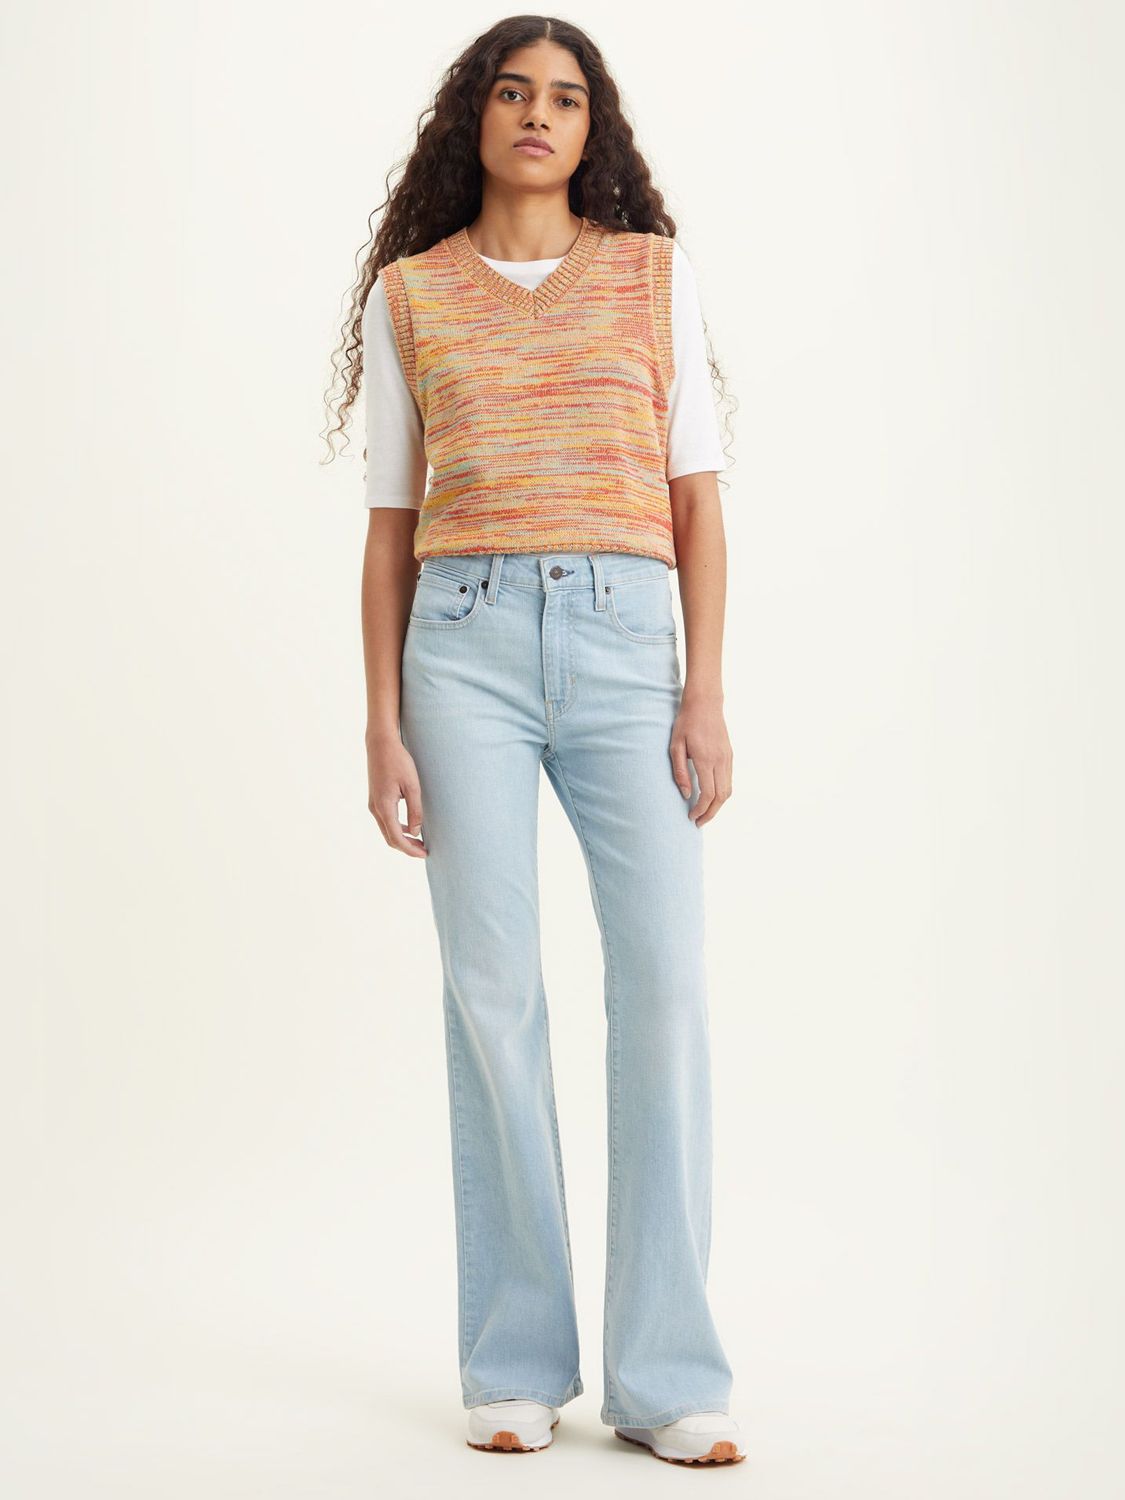 Levi's 726 High Rise Flare Jeans, Snatched